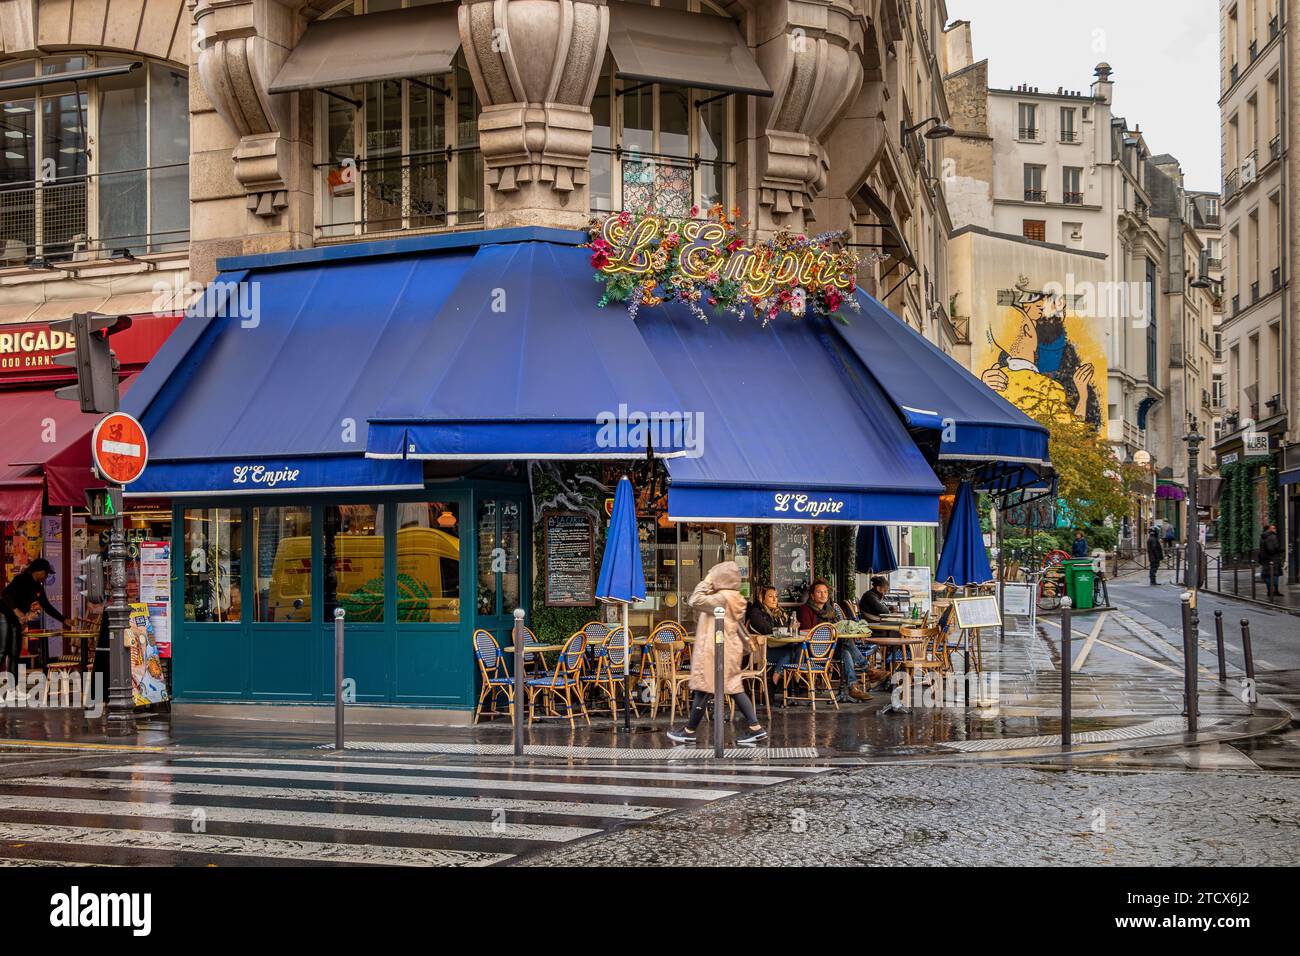 People sitting outside on the terrace at L’Empire a cafe, brasserie on Rue des Petits Carreaux on a wet rainy day in Paris, France Stock Photo